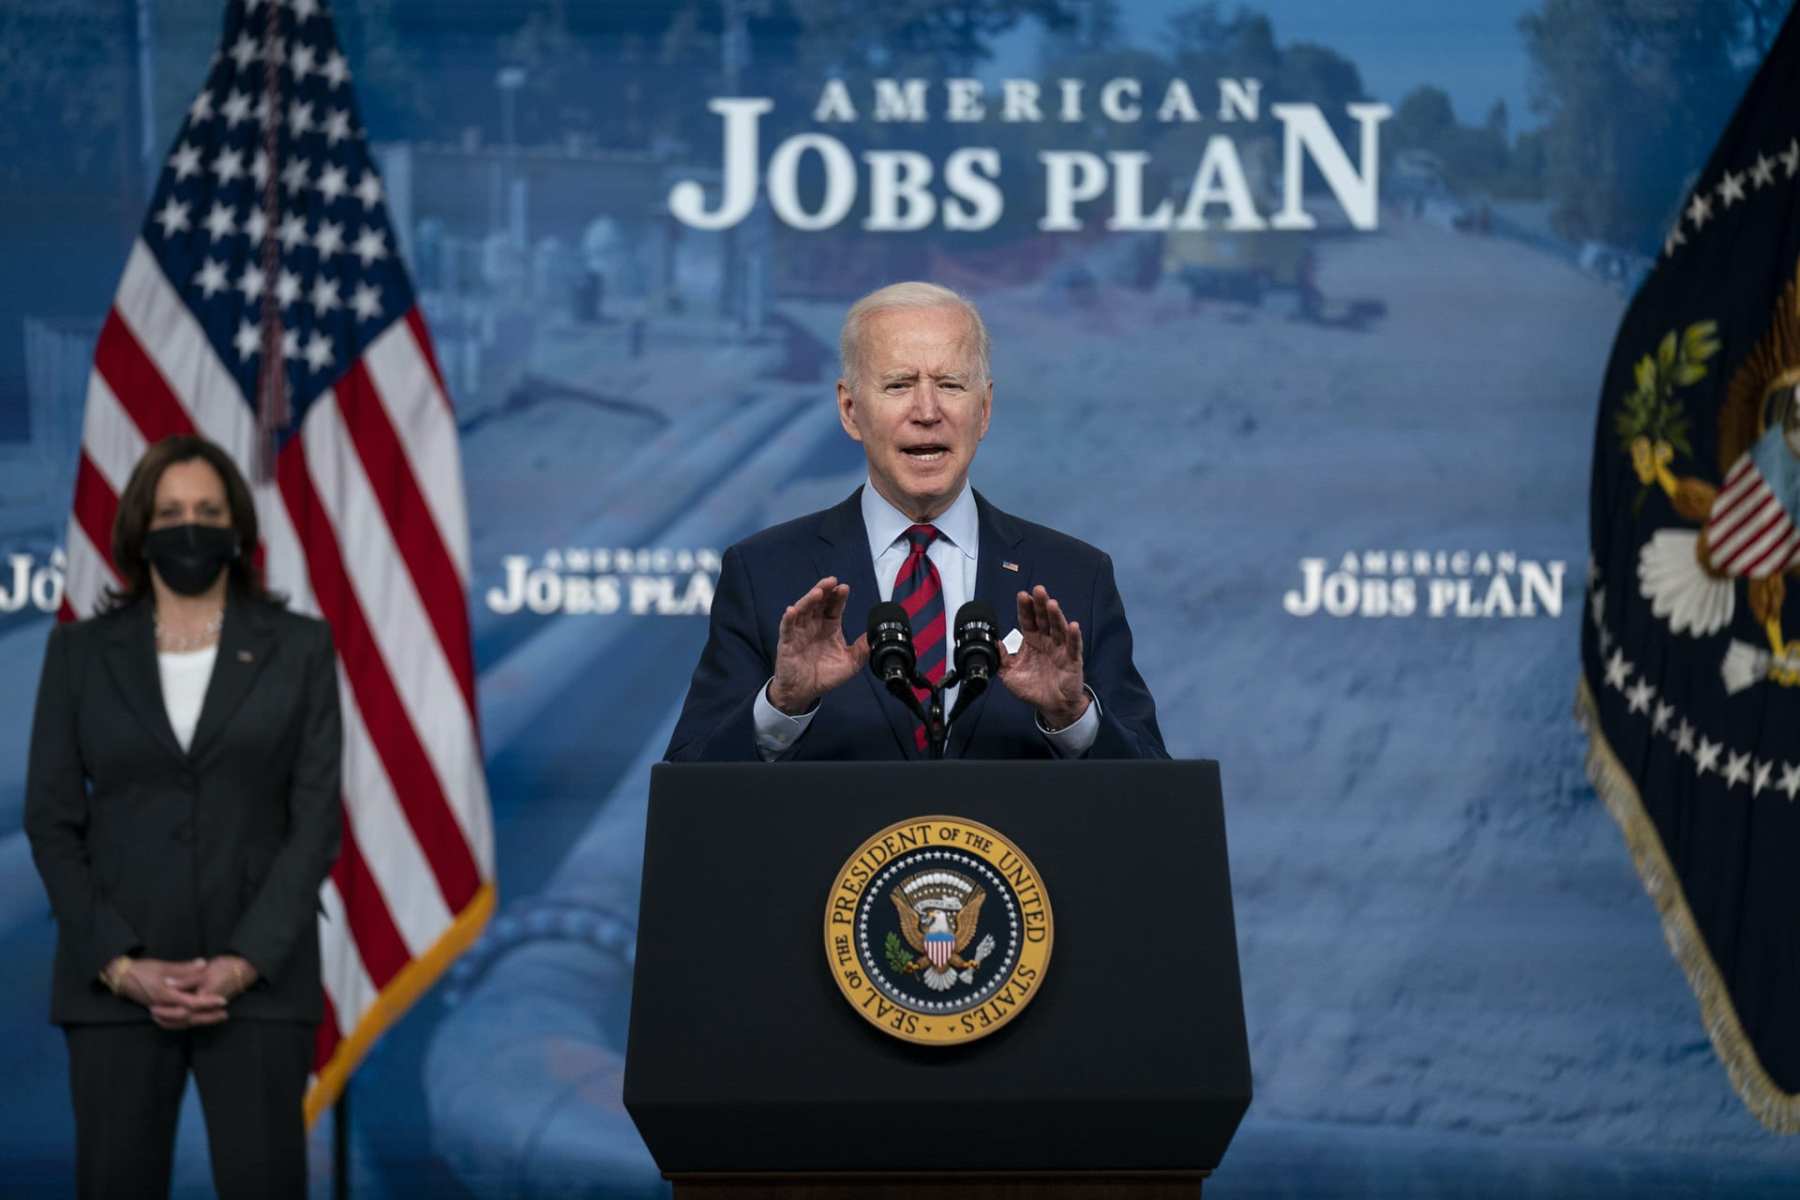 Joe Biden speaking at a podium in front of a backdrop that reads "American Jobs Plan"